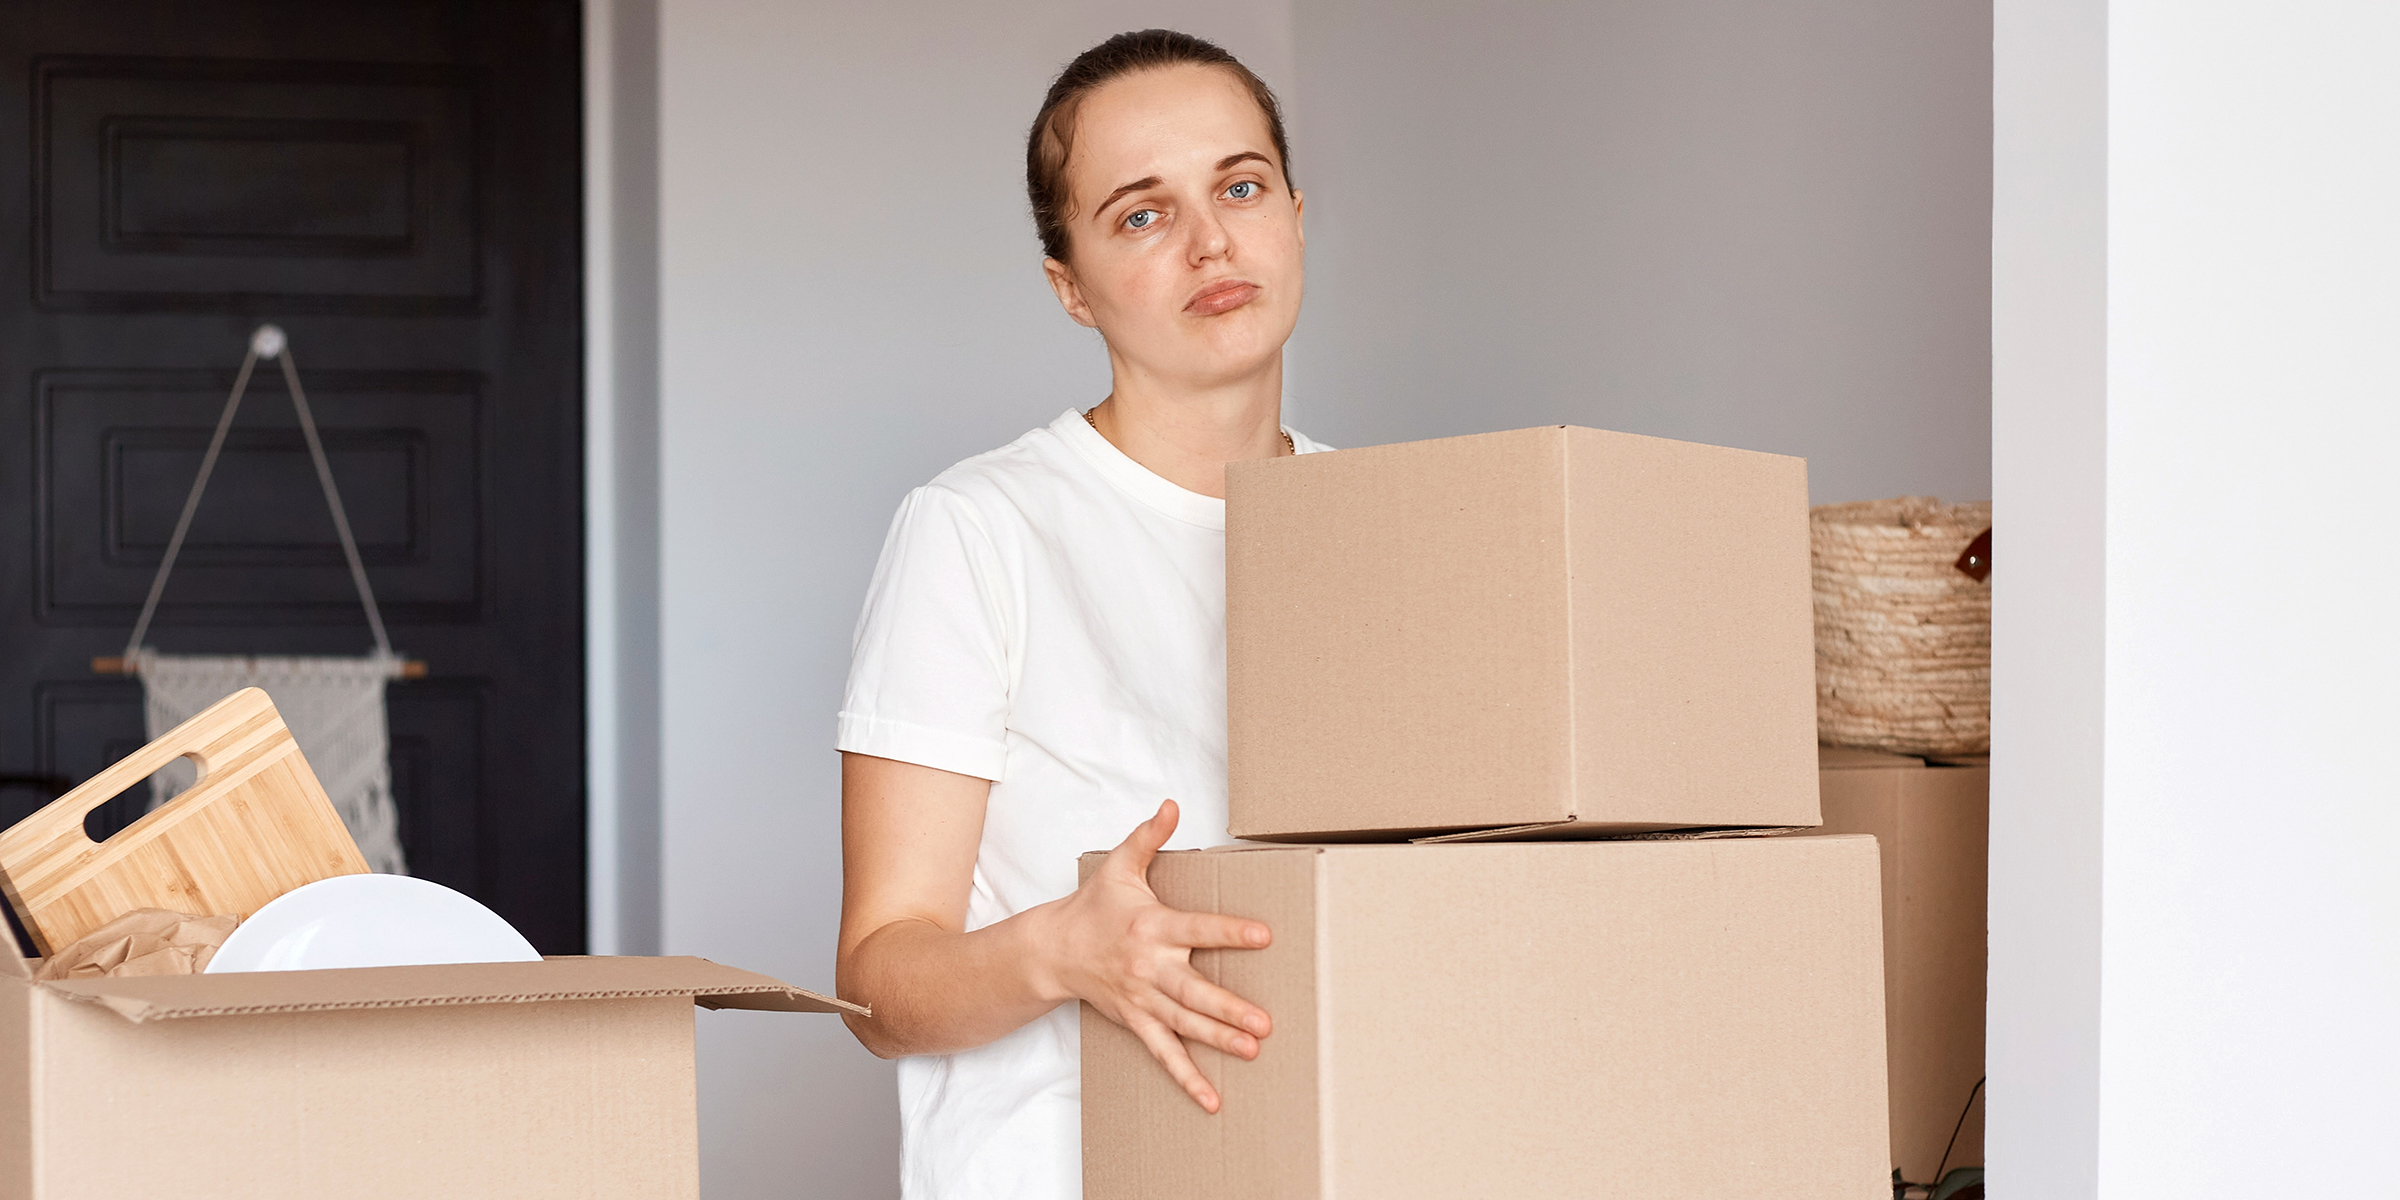 A sad woman holding boxes | Source: Shutterstock